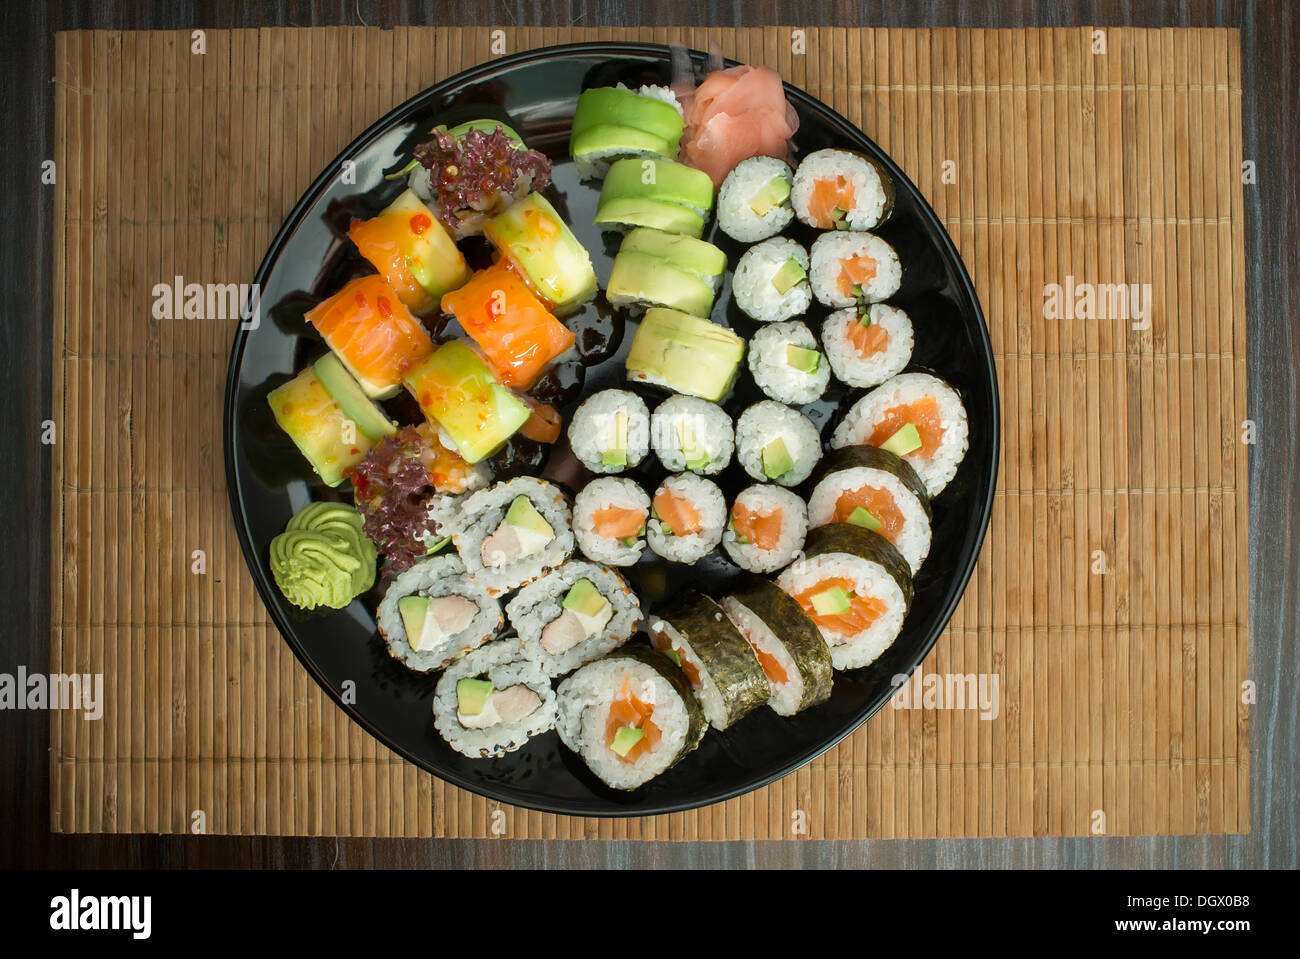 Plate of sushi in restaurant Stock Photo